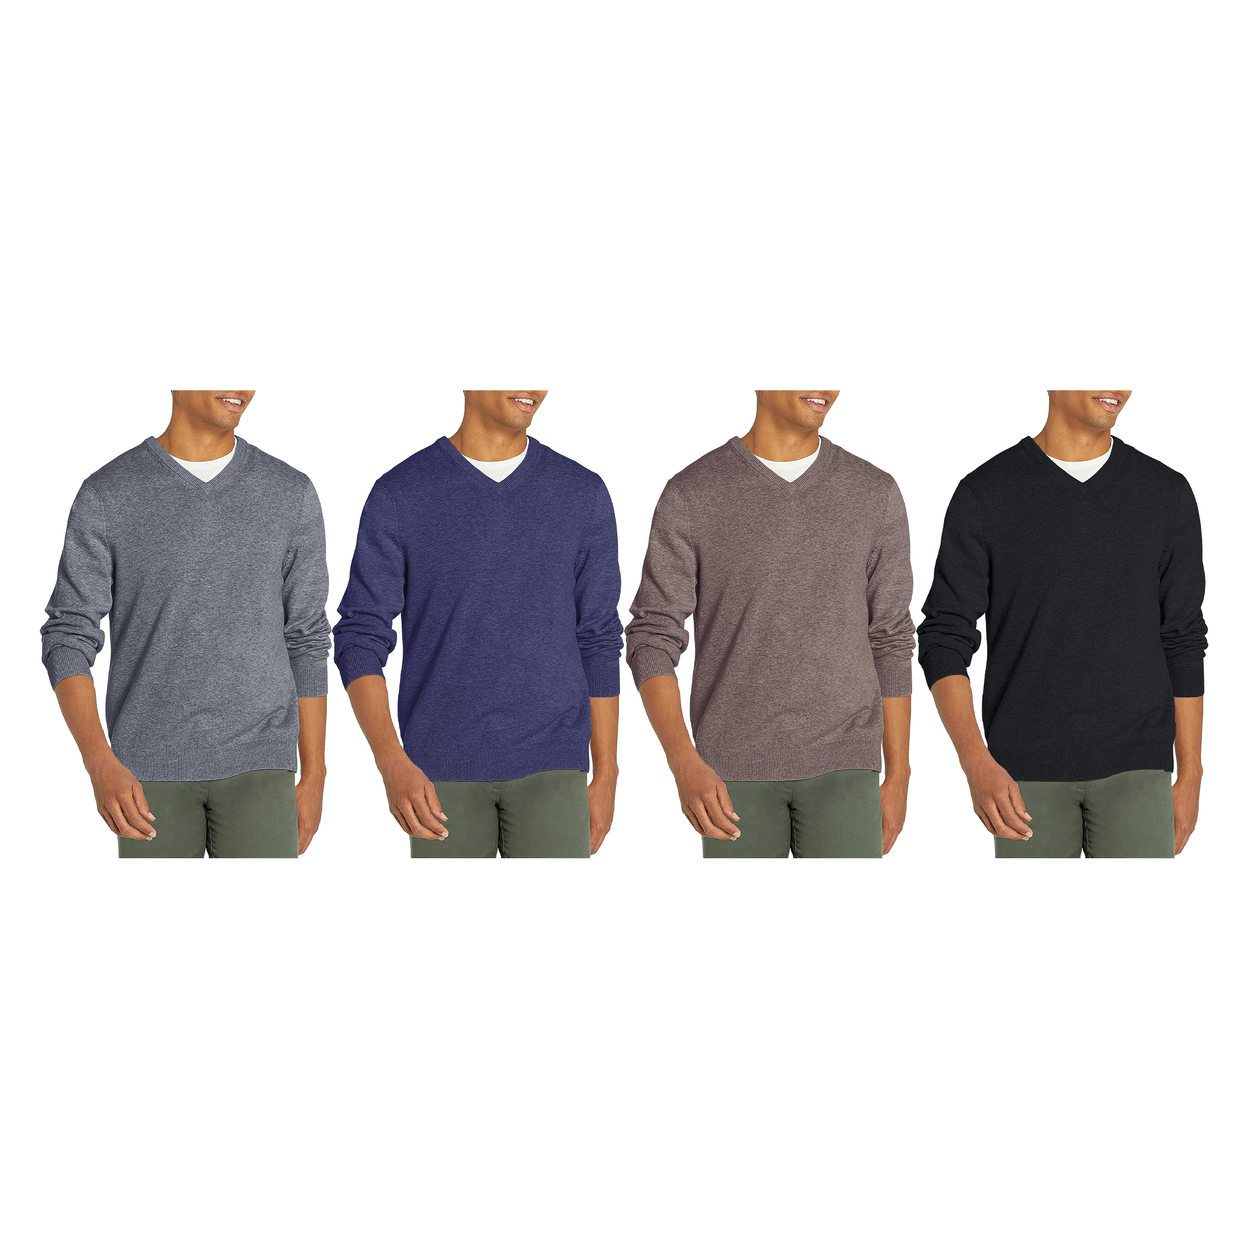 Men's Casual Ultra-Soft Slim Fit Warm Knit V-Neck Sweater - Brown, X-large